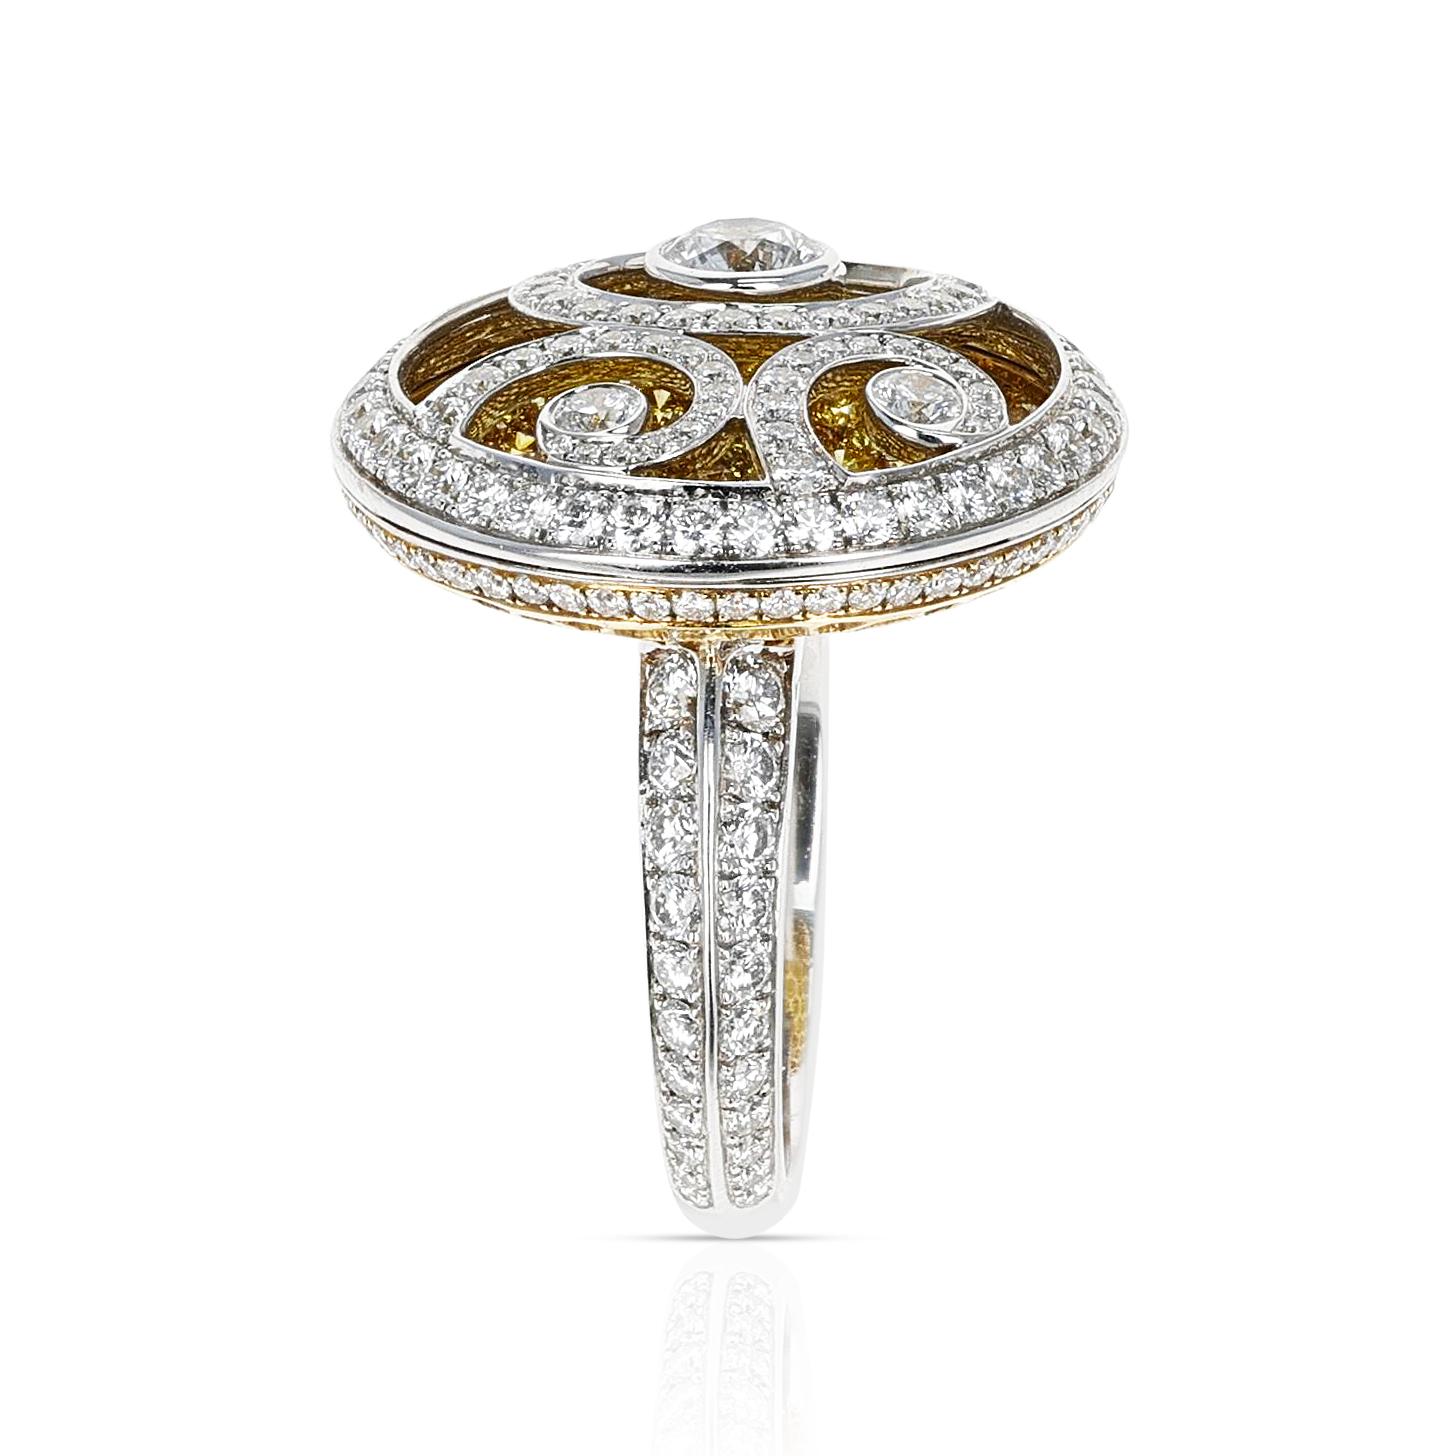 An exceptional and chic white diamond and yellow diamond cocktail ring, coined Diamond on Diamond, by Graff. The ring can be worn in casual and formal environments. It is set with 2.38 carats of Yellow Diamonds and 2.44 carats of White Diamonds.